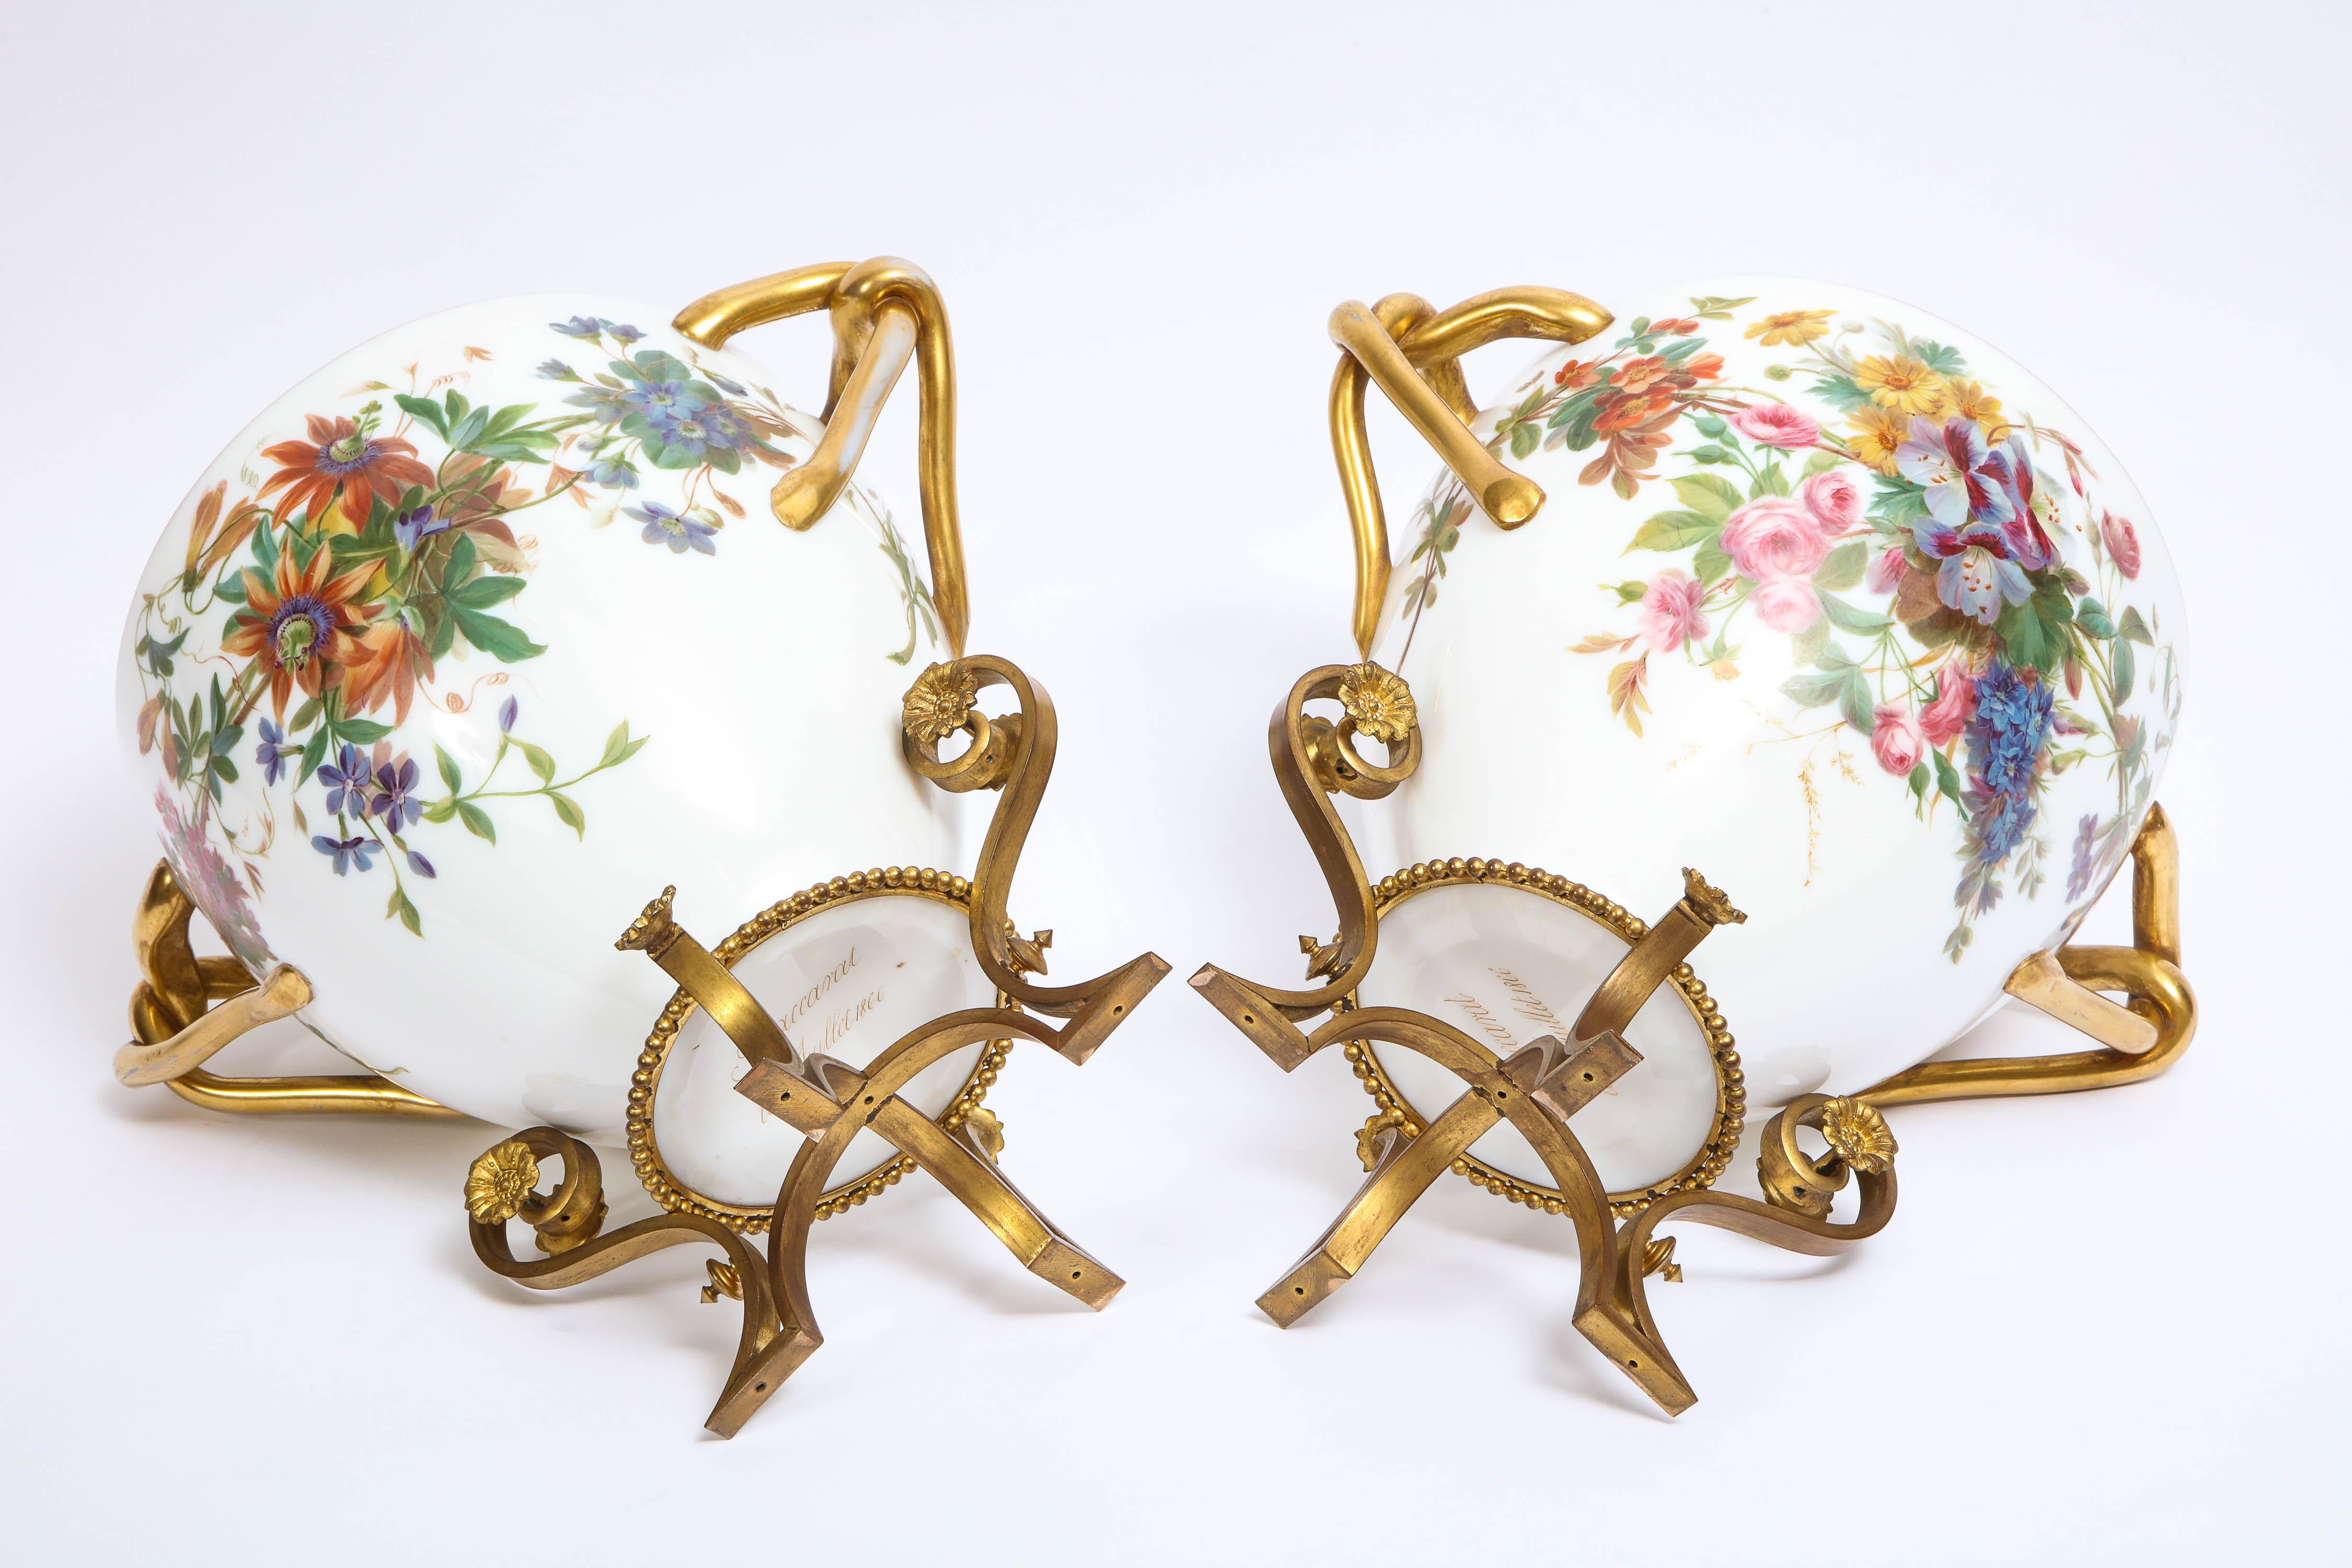 Important Pair of Enamel Hand-Painted White Opaline Vases Signed by Baccarat For Sale 4